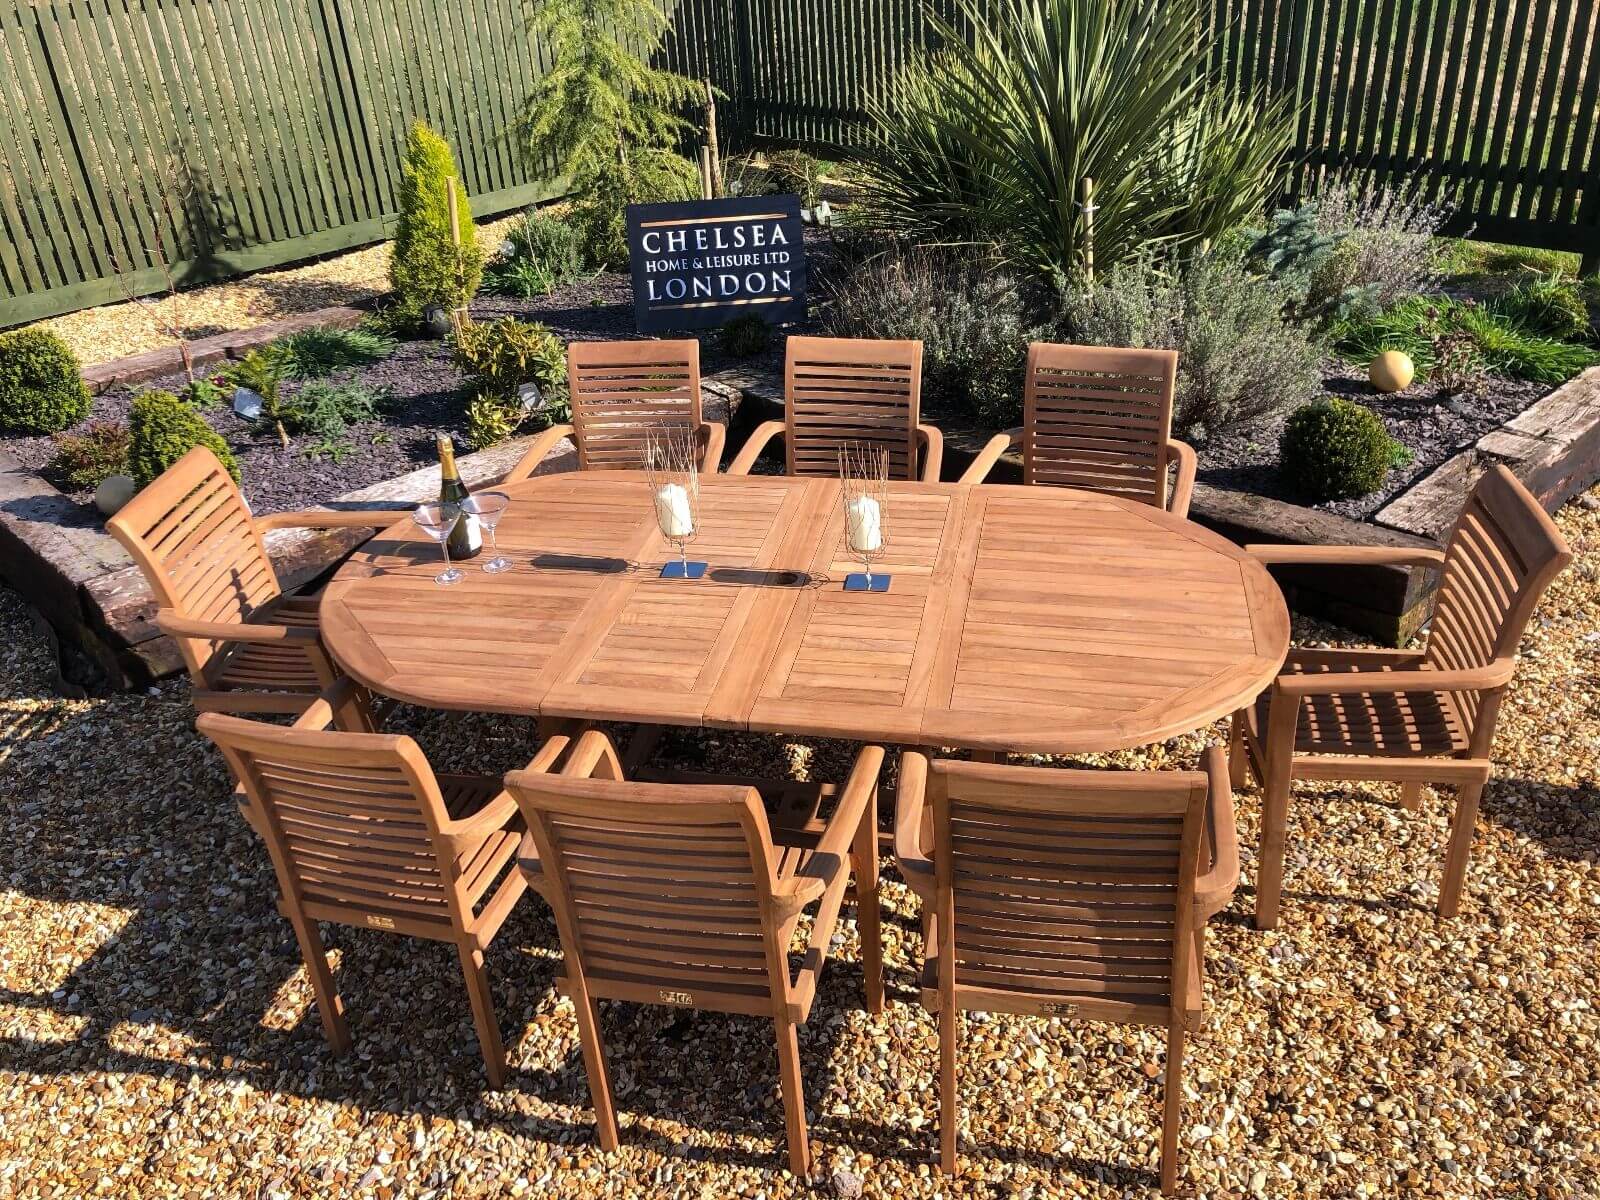 luxury extending teak table with 8 stacking teak chairs - chelsea home